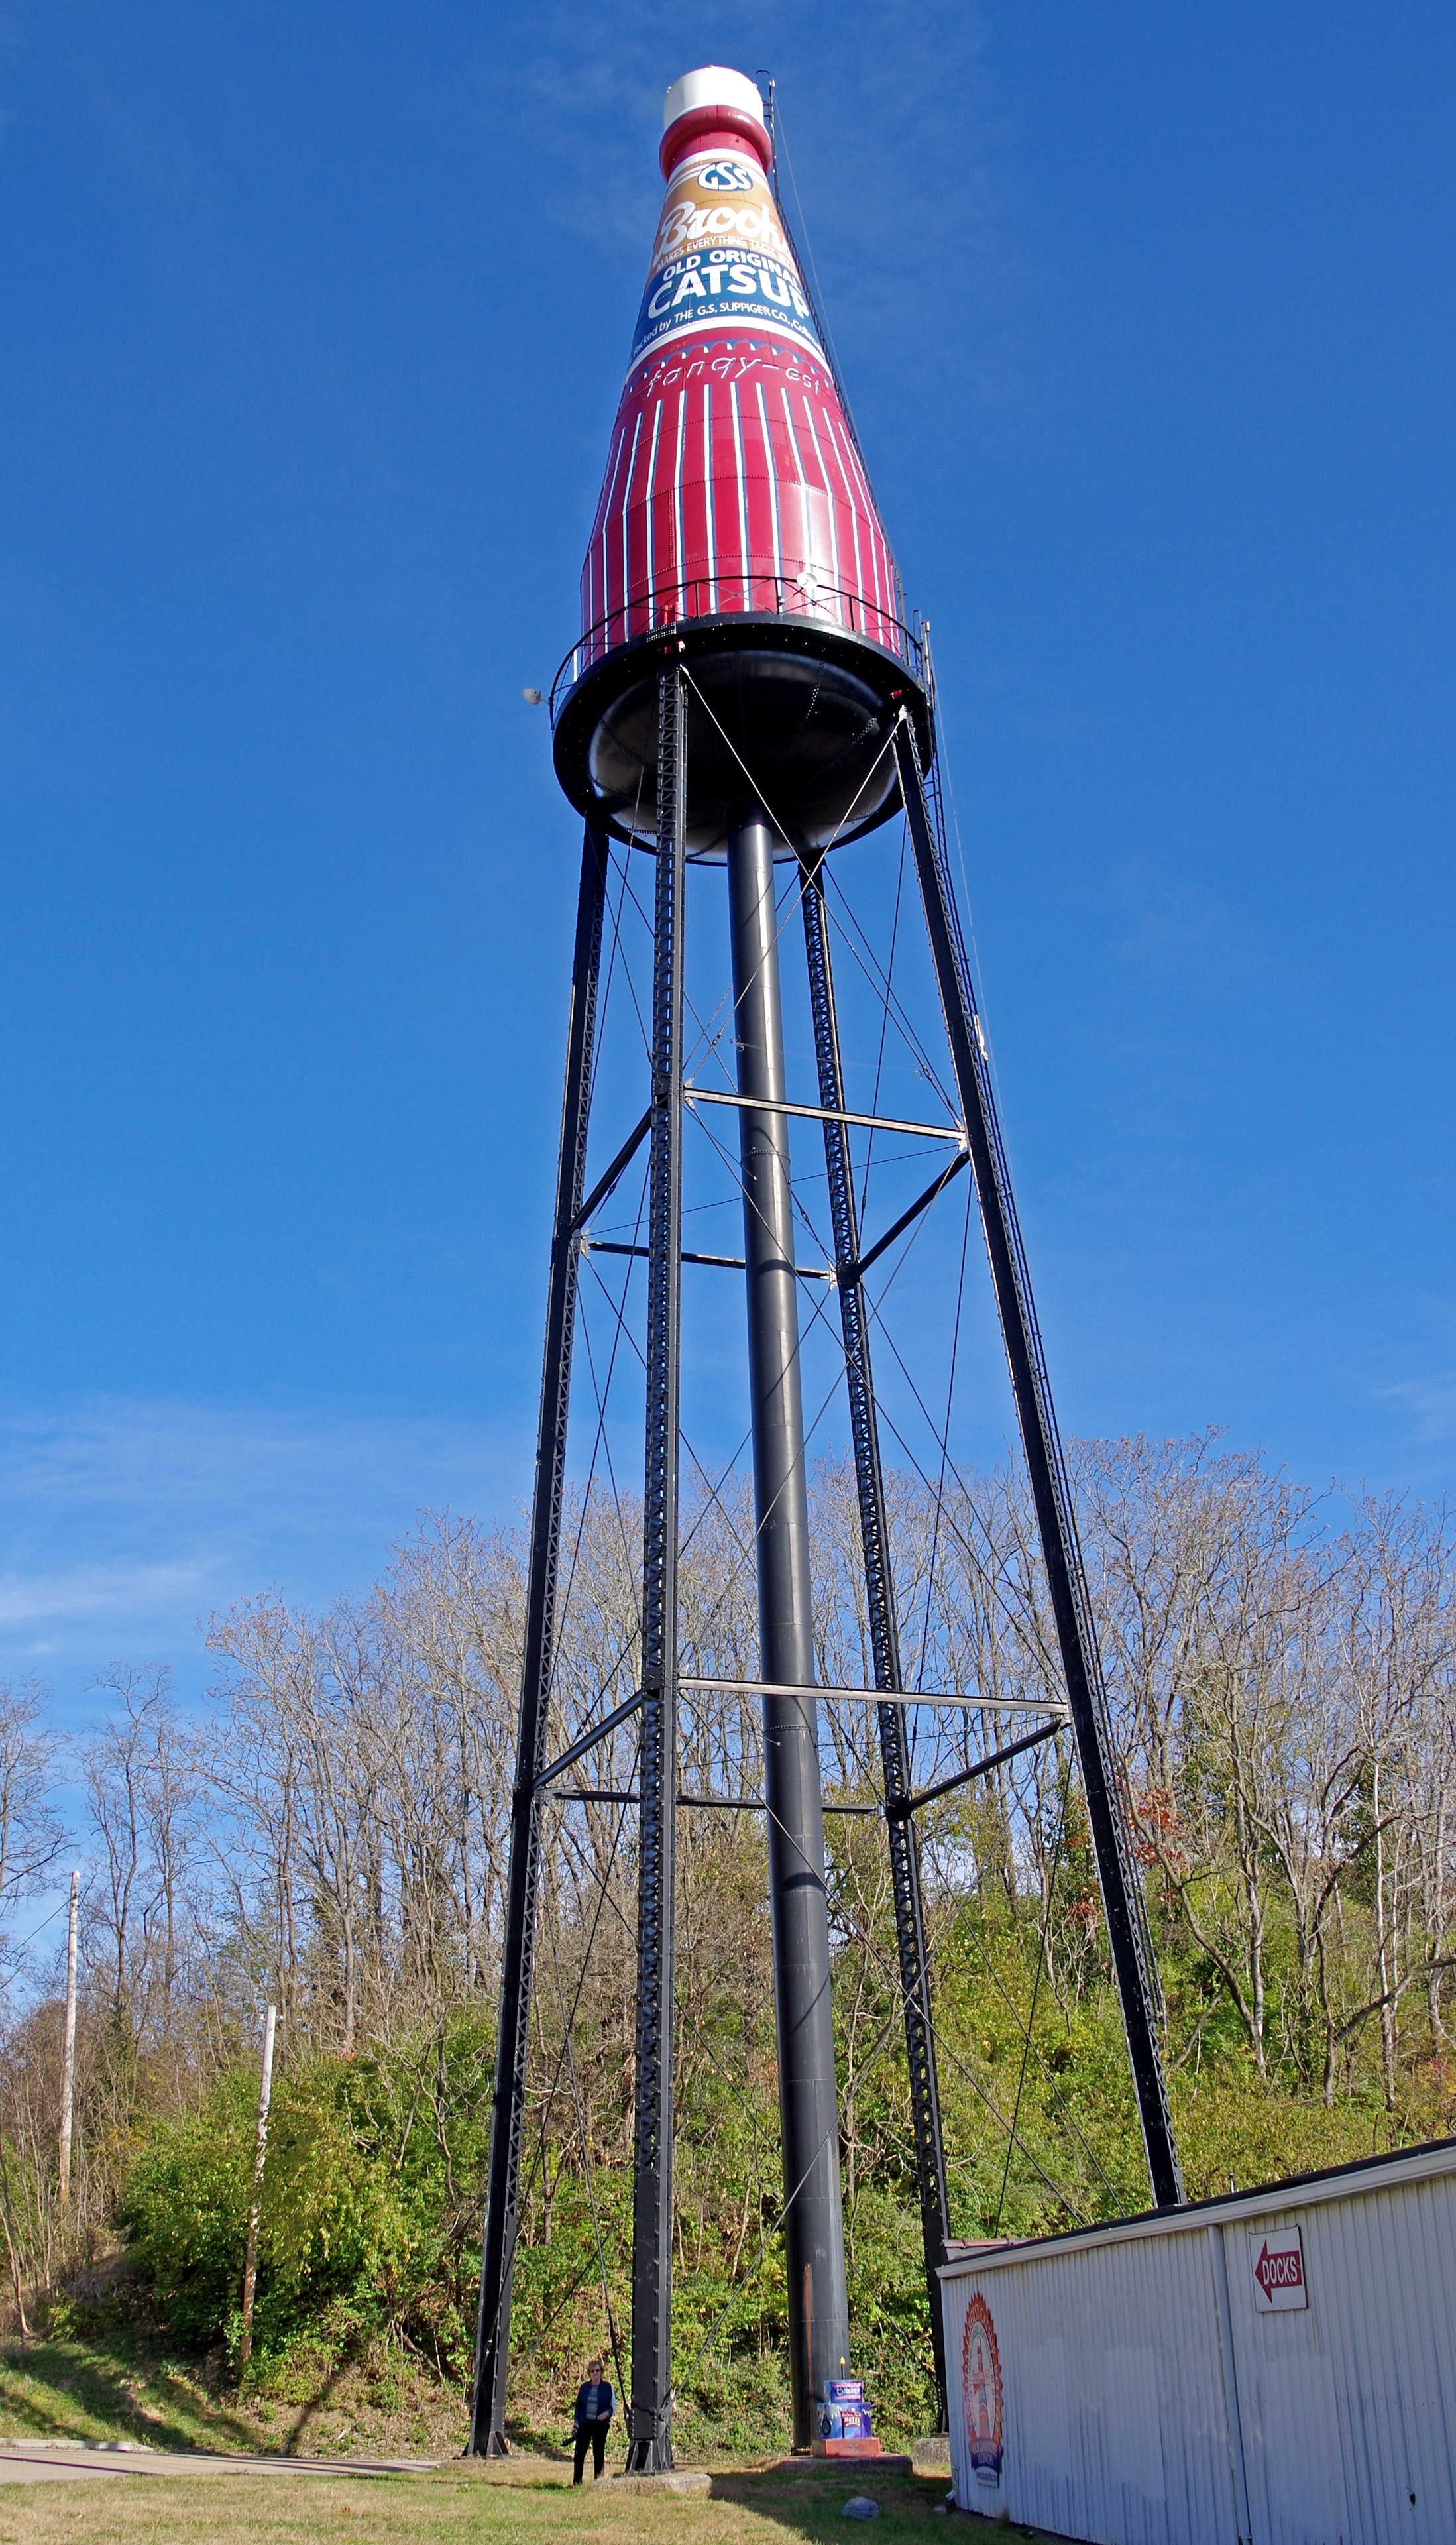 When I am near anything that is advertised as "The World's Largest" anything I have to go by and take a look.  In this case it is the World's Largest Catsup Bottle.